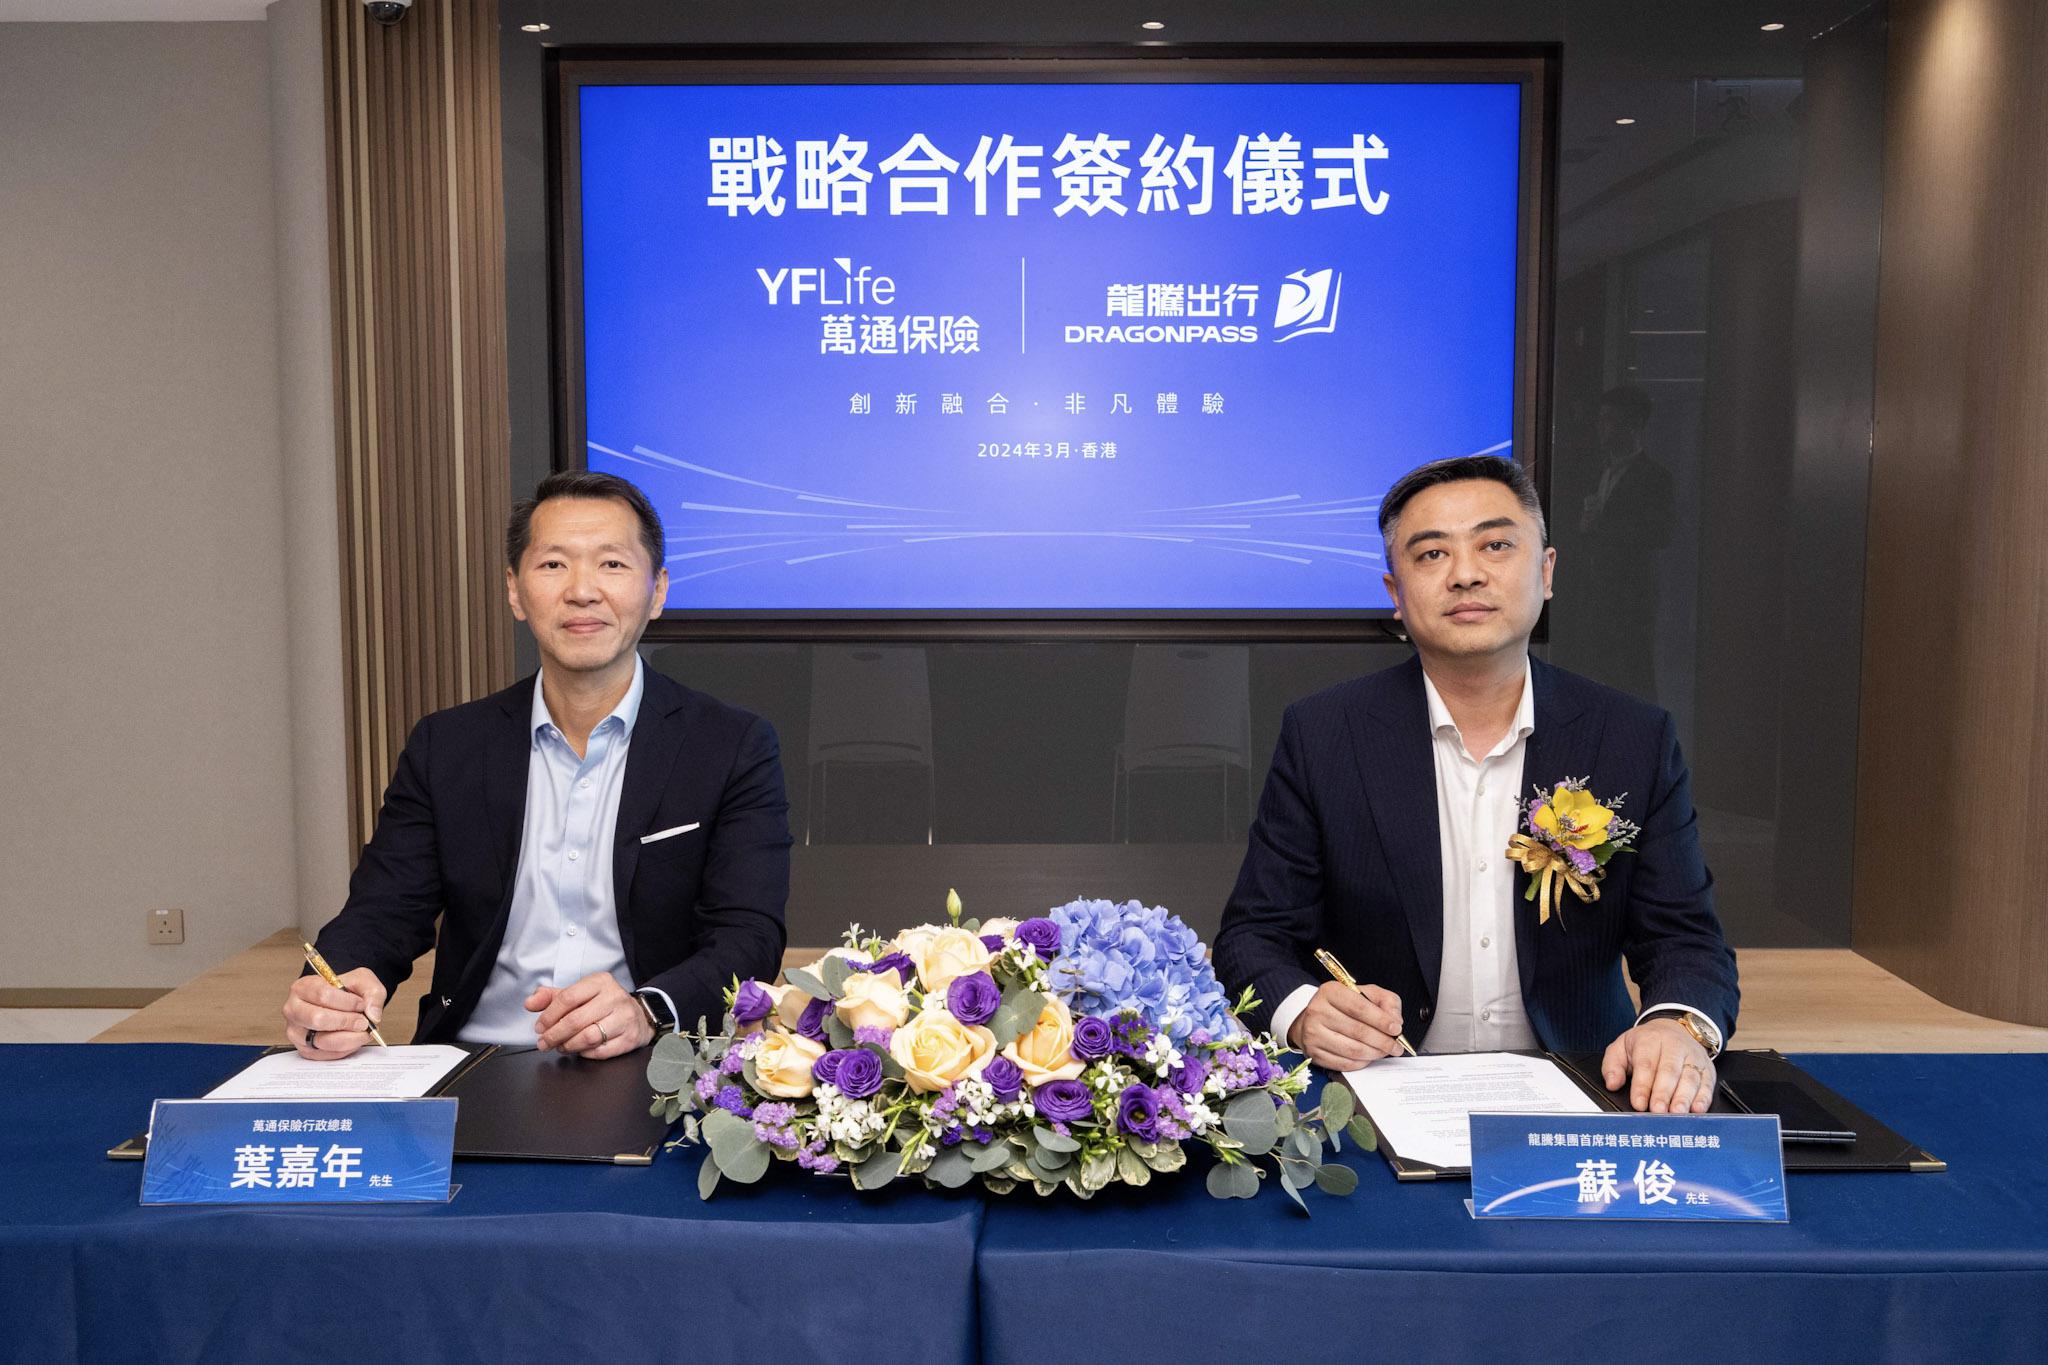 Mr. Victor Yip, Chief Executive Officer of YF Life (left), and Mr. Su Jun, Group CGO and CEO of China at DragonPass (right), officiate at the signing ceremony. 